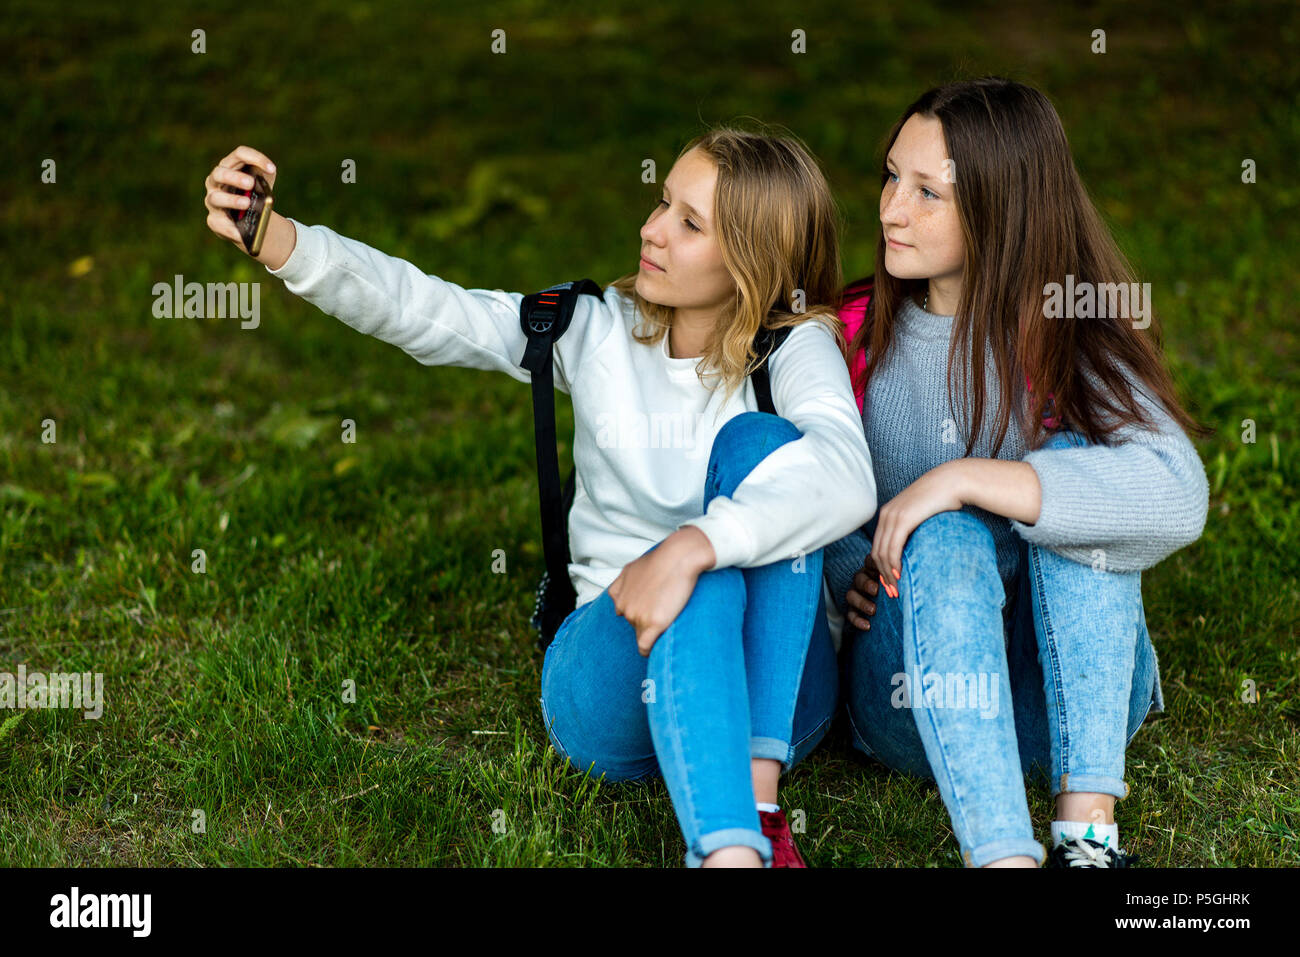 Two teenage girls. In the summer of the city park. They sit on the grass and take photos on smartphone. Behind backpacks. The concept of school friendship. Emotion pose on the phone. Stock Photo